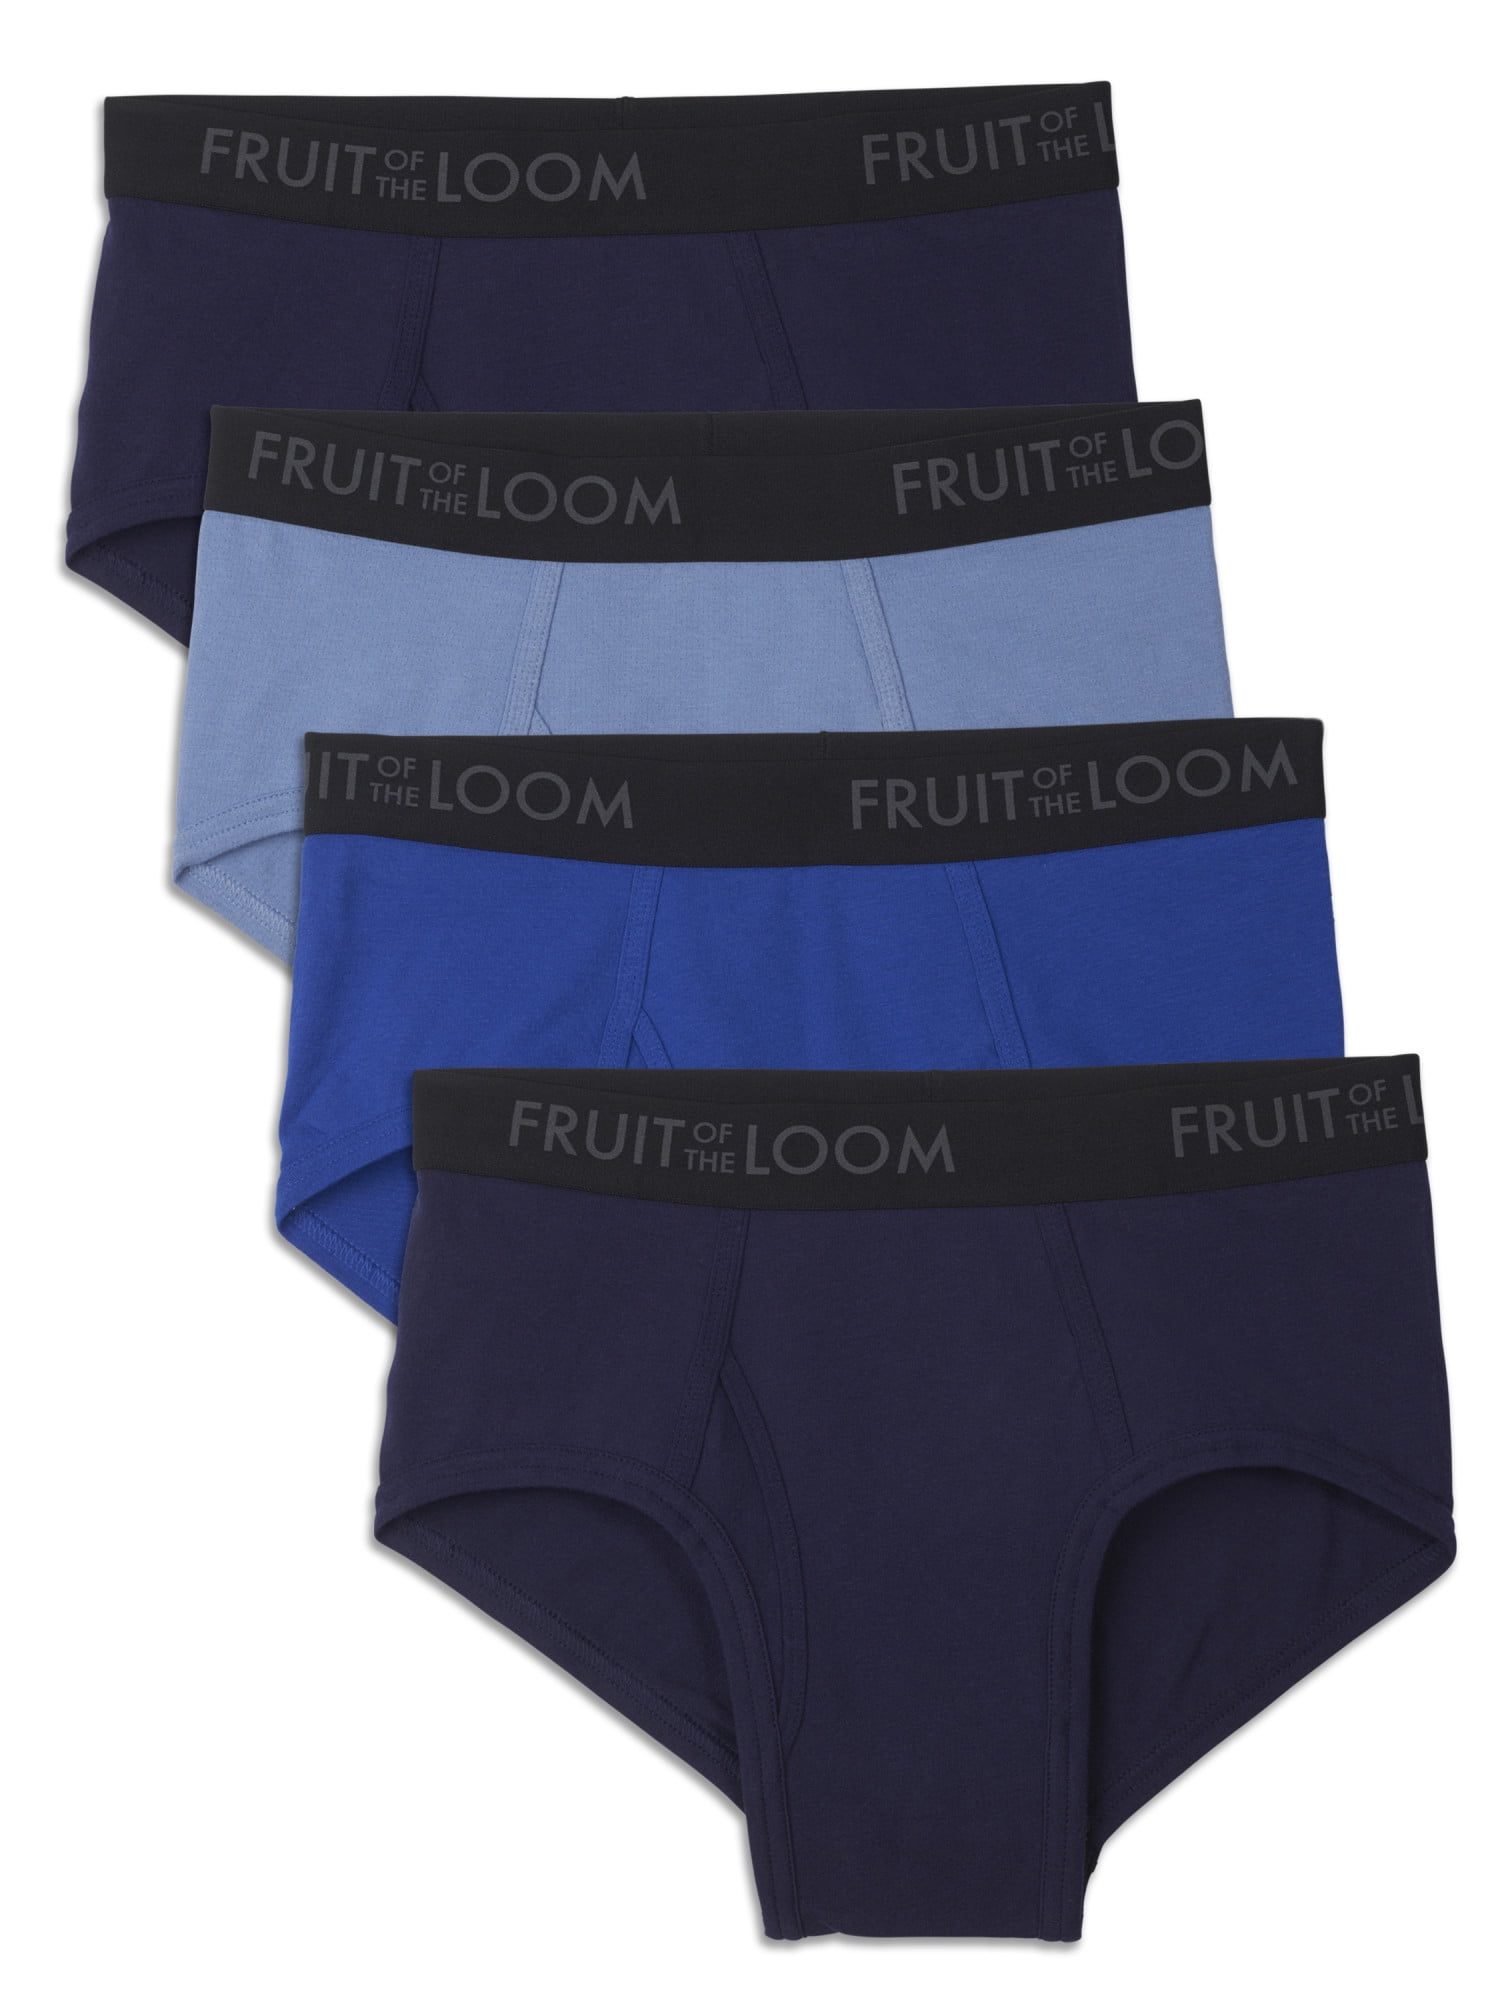 Fruit of the Loom Men's Breathable Cotton Micro-Mesh Black and Gray Briefs,  4 Pack 